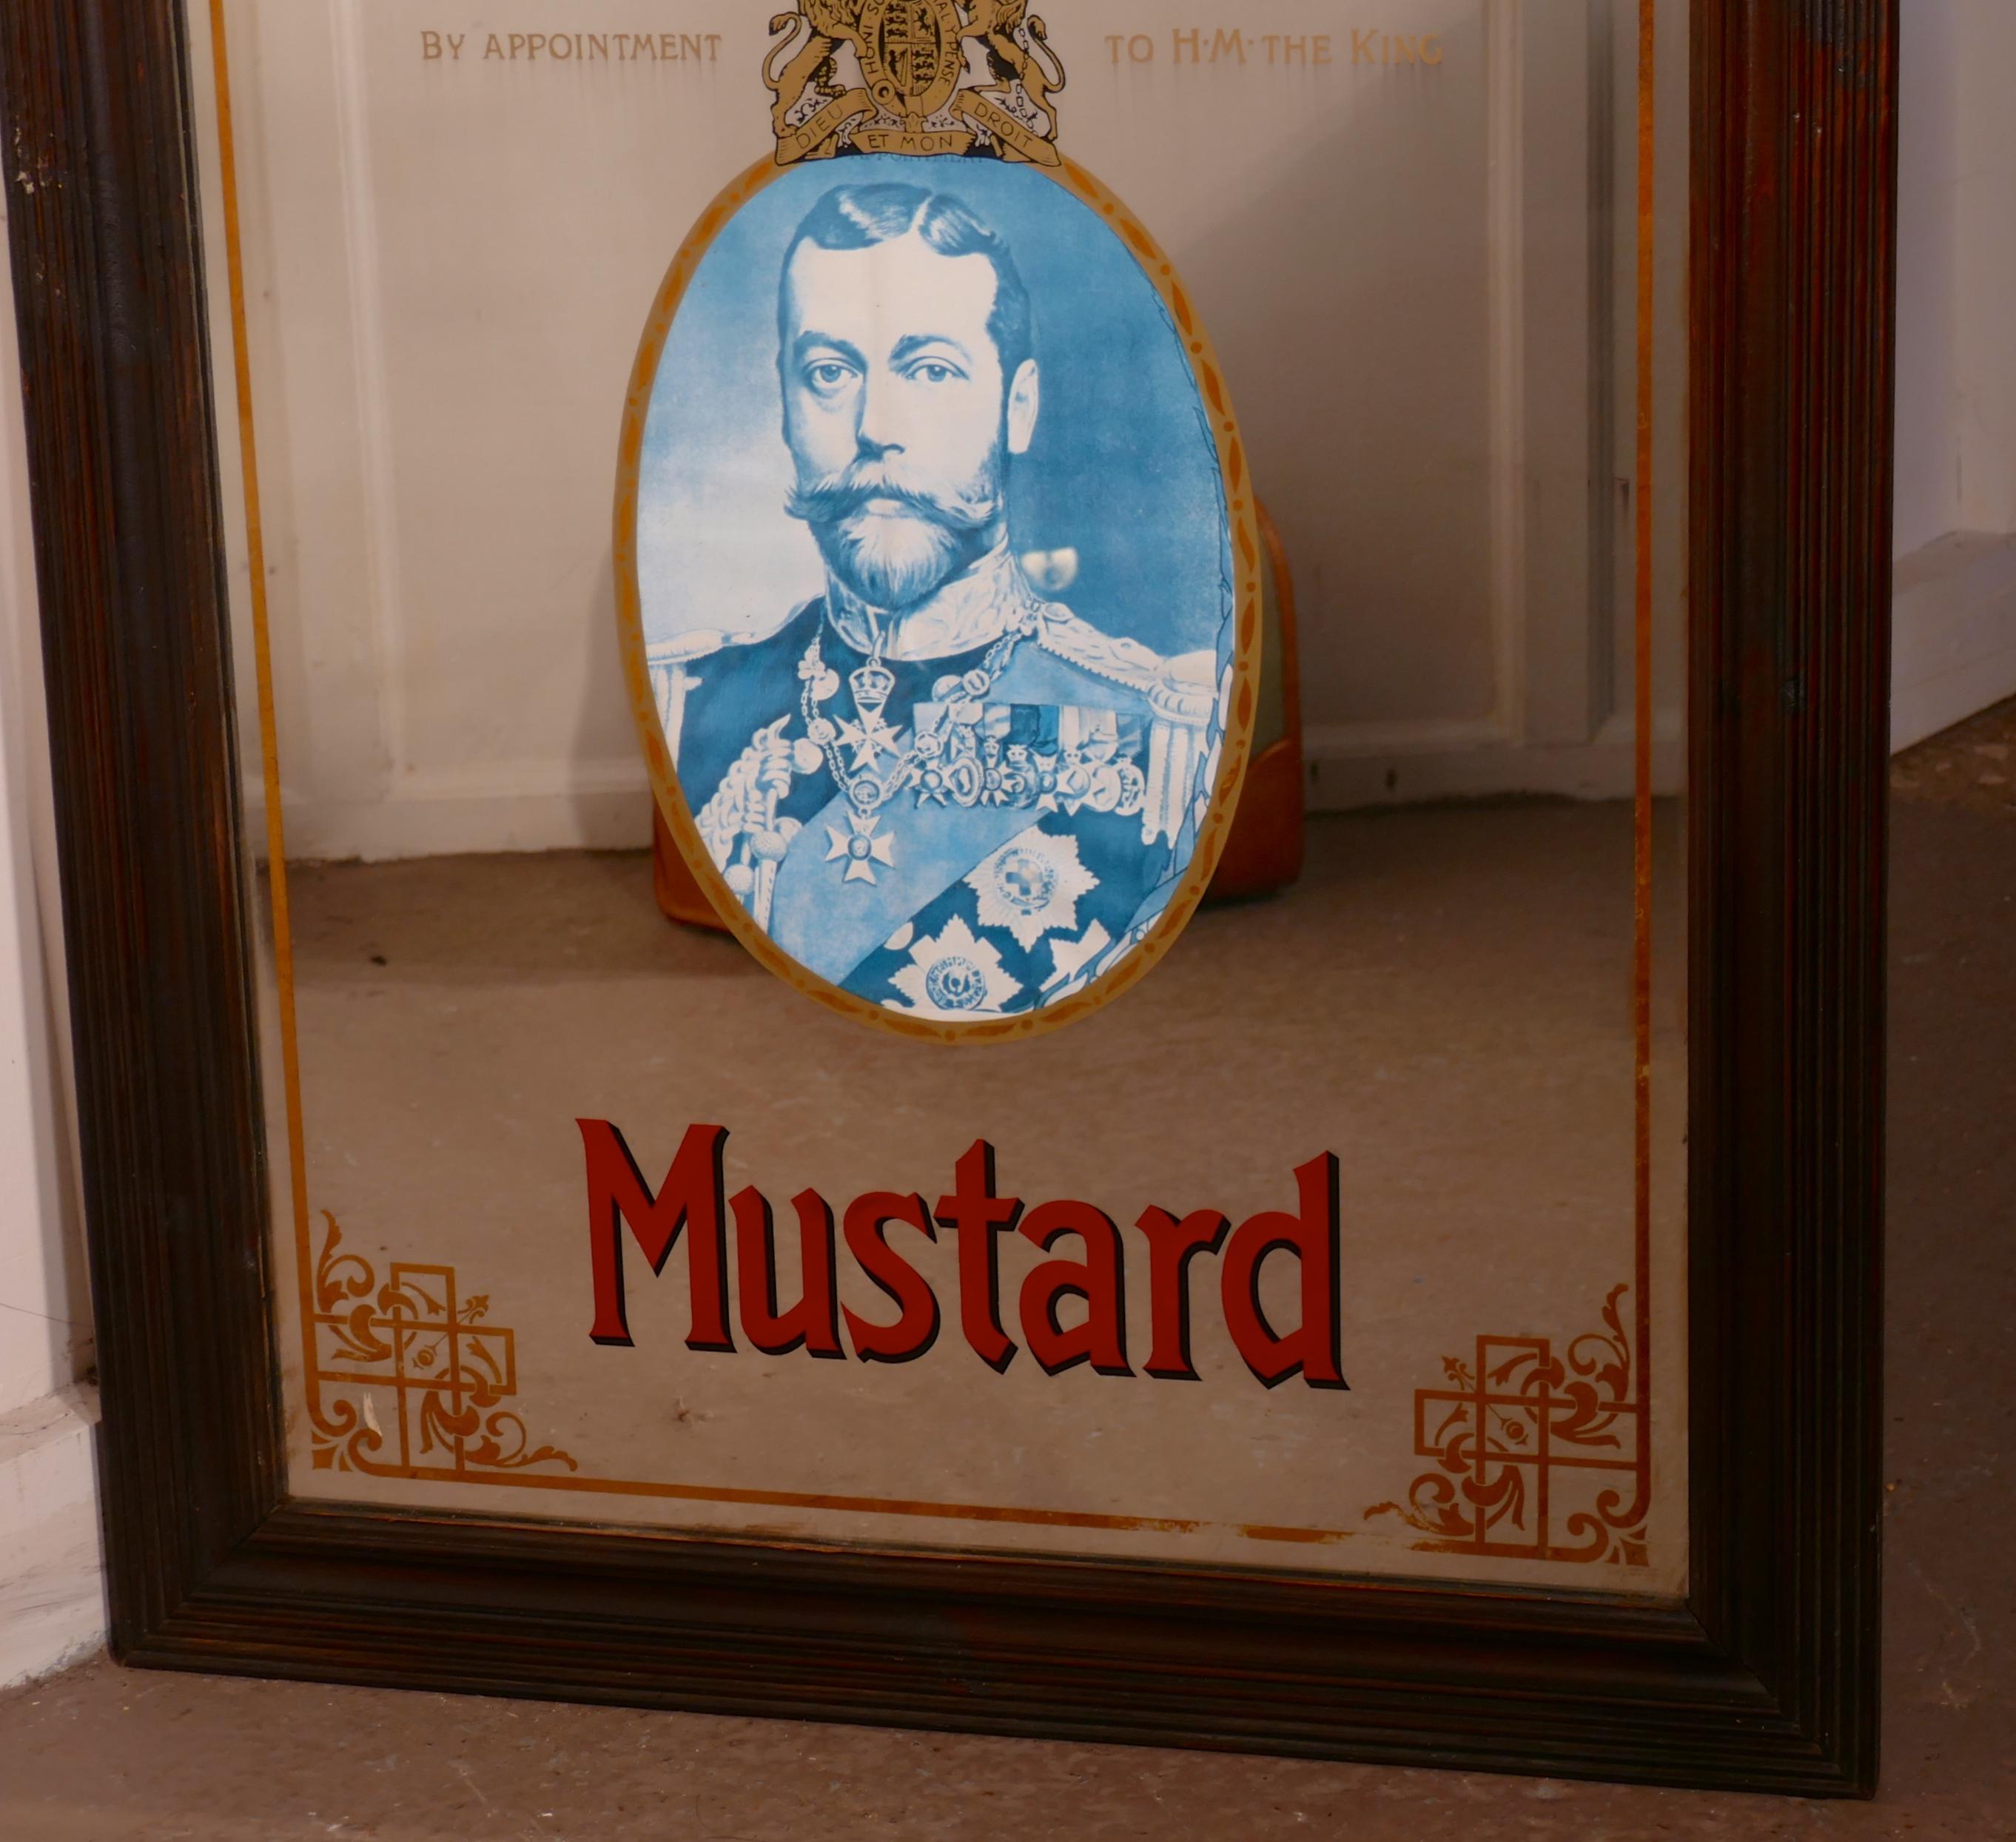 A rare George V Colemans Mustard advertising mirror, shop display.

Colemans Mustard has always been a favourite with the Royal Family, in this one we even have a portrait of the king in the centre of the Royal Warrant 
The mirror has an etched